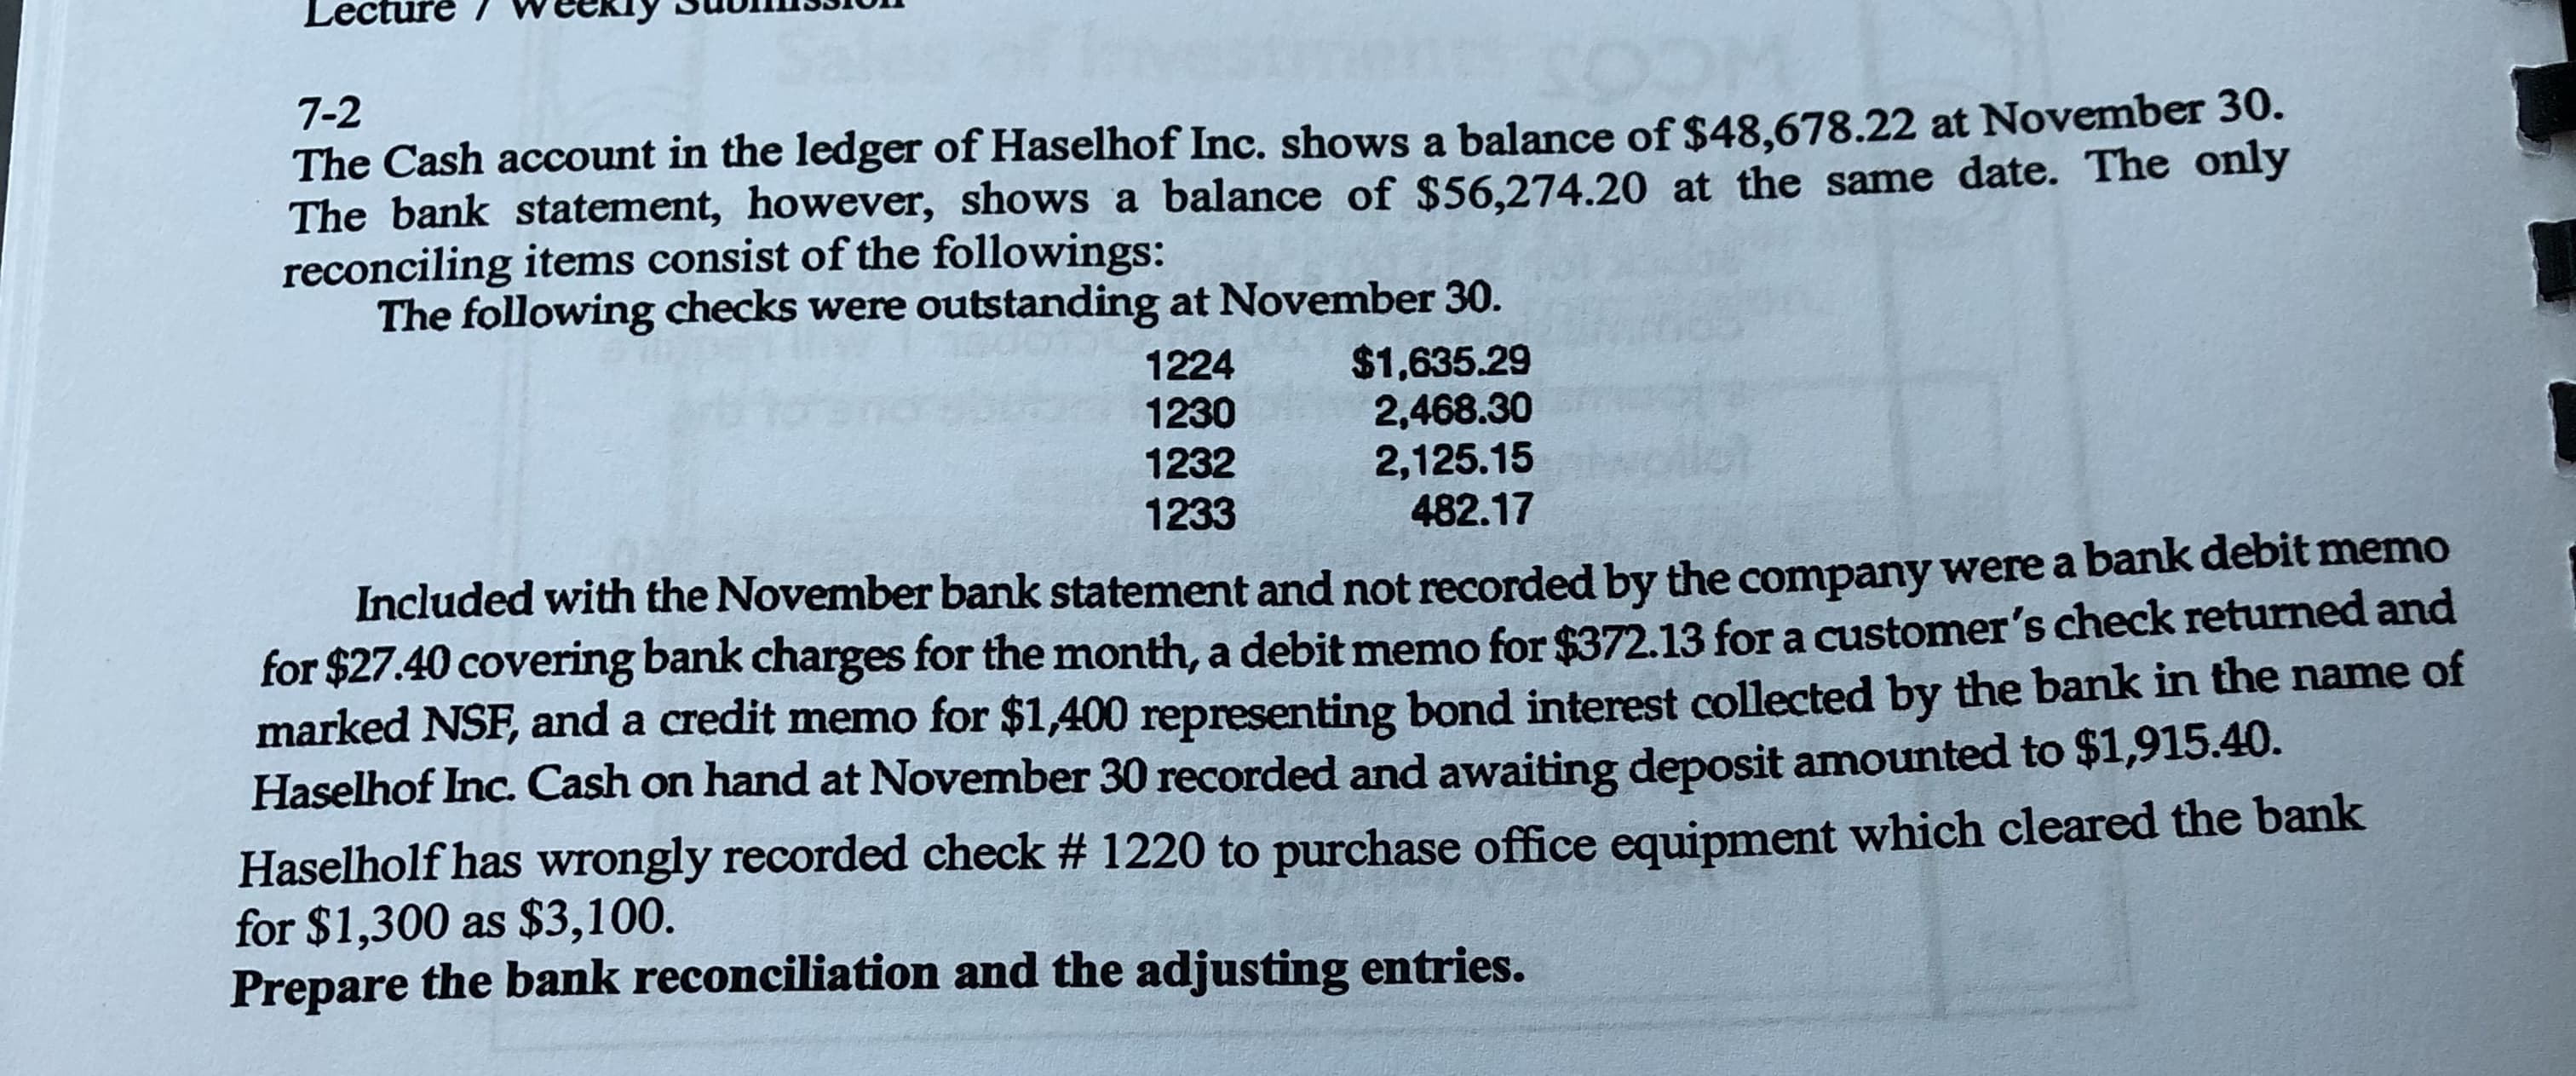 7-2
The Cash account in the ledger of Haselhof Inc. shows a balance of $48,678.22 at November 30.
The bank statement, however, shows a balance of $56,274.20 at the same date. The only
reconciling items consist of the followings:
The following checks were outstanding at November 30.
1224
1230
$1,635.29
2,468.30
2,125.15
482.17
1232
1233
Included with the November bank statement and not recorded by the company werea bank debit memo
for $27.40 covering bank charges for the month, a debit memo for $372.13 fora customer's check returned and
marked NSF, and a credit memo for $1,400 representing bond interest collected by the bank in the name of
Haselhof Inc. Cash on hand at November 30 recorded and awaiting deposit amounted to $1,915.40.
Haselholf has wrongly recorded check # 1220 to purchase office equipment which cleared the bank
for $1,300 as $3,100.
Prepare the bank reconciliation and the adjusting entries.
